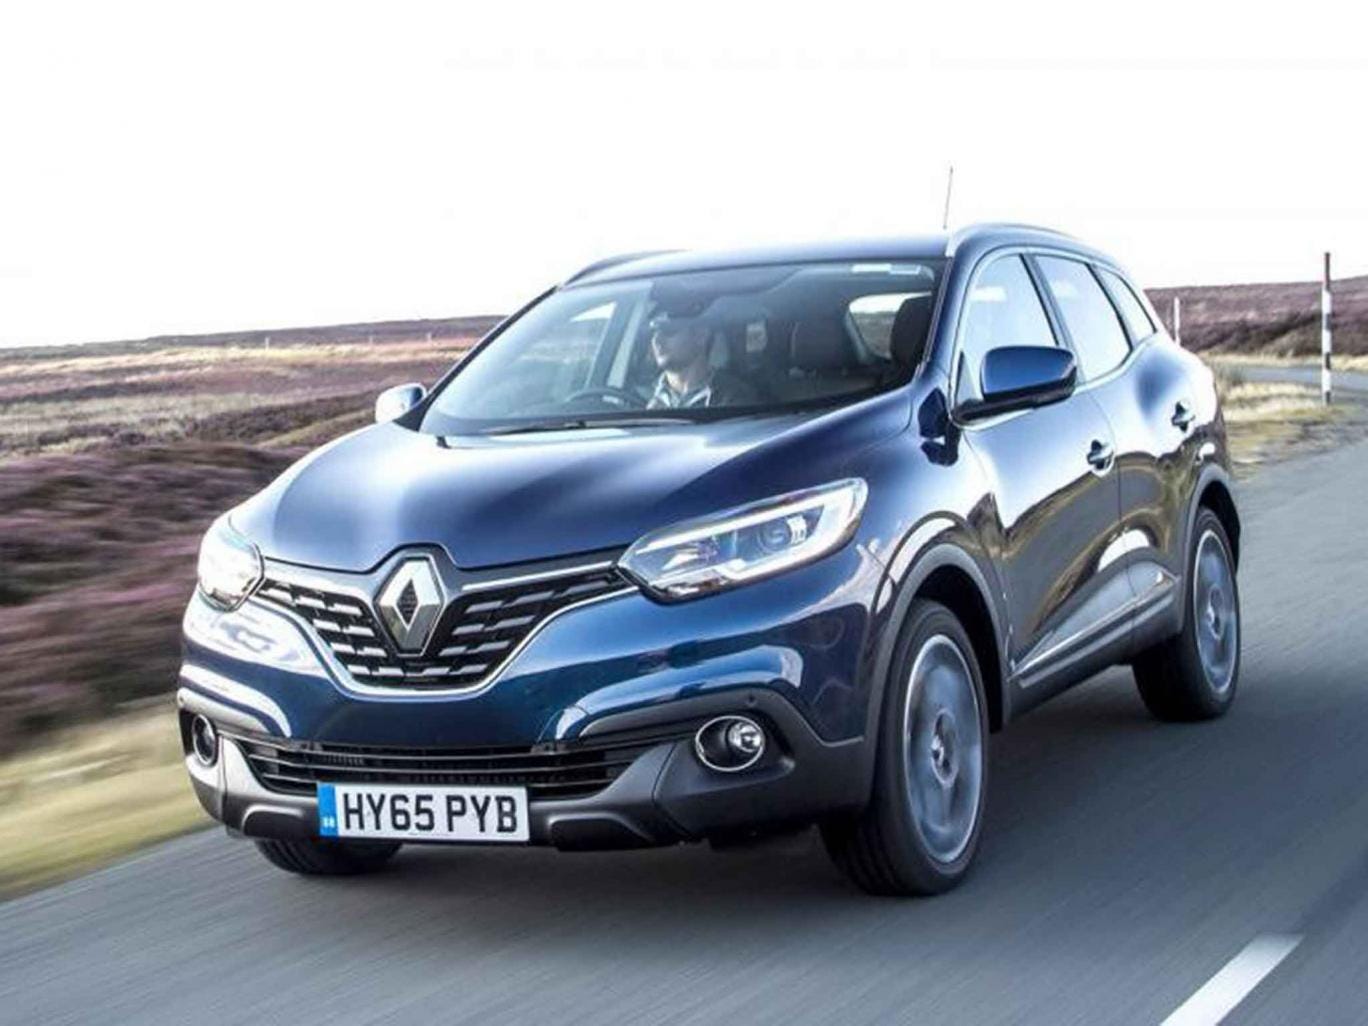 The Kadjar can manage overtaking on twistier roads and won’t cause any problems on the motorway